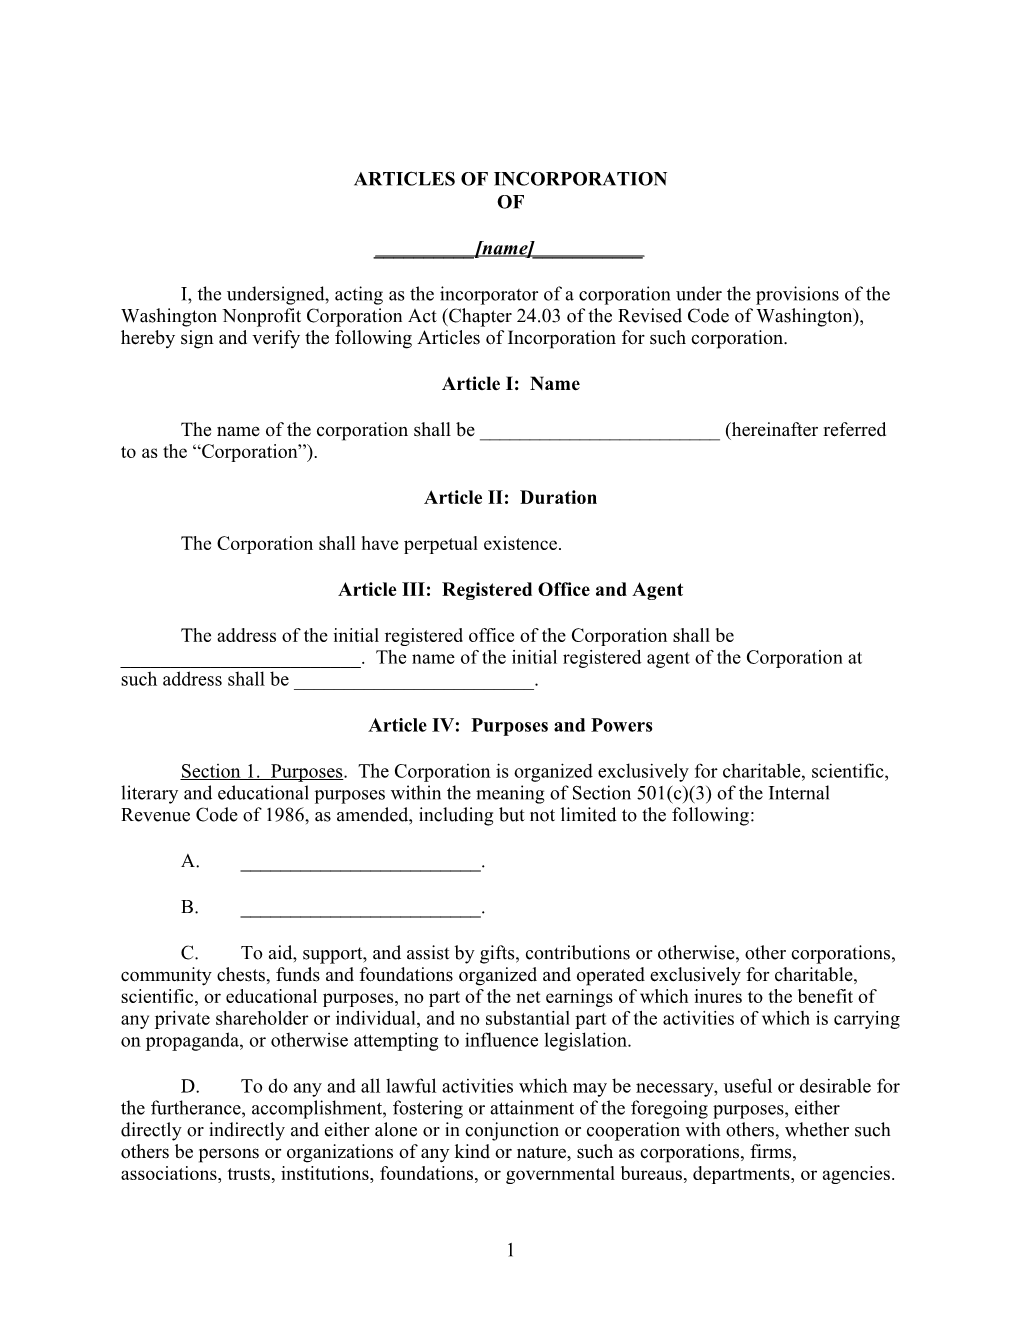 Articles of Incorporation s6